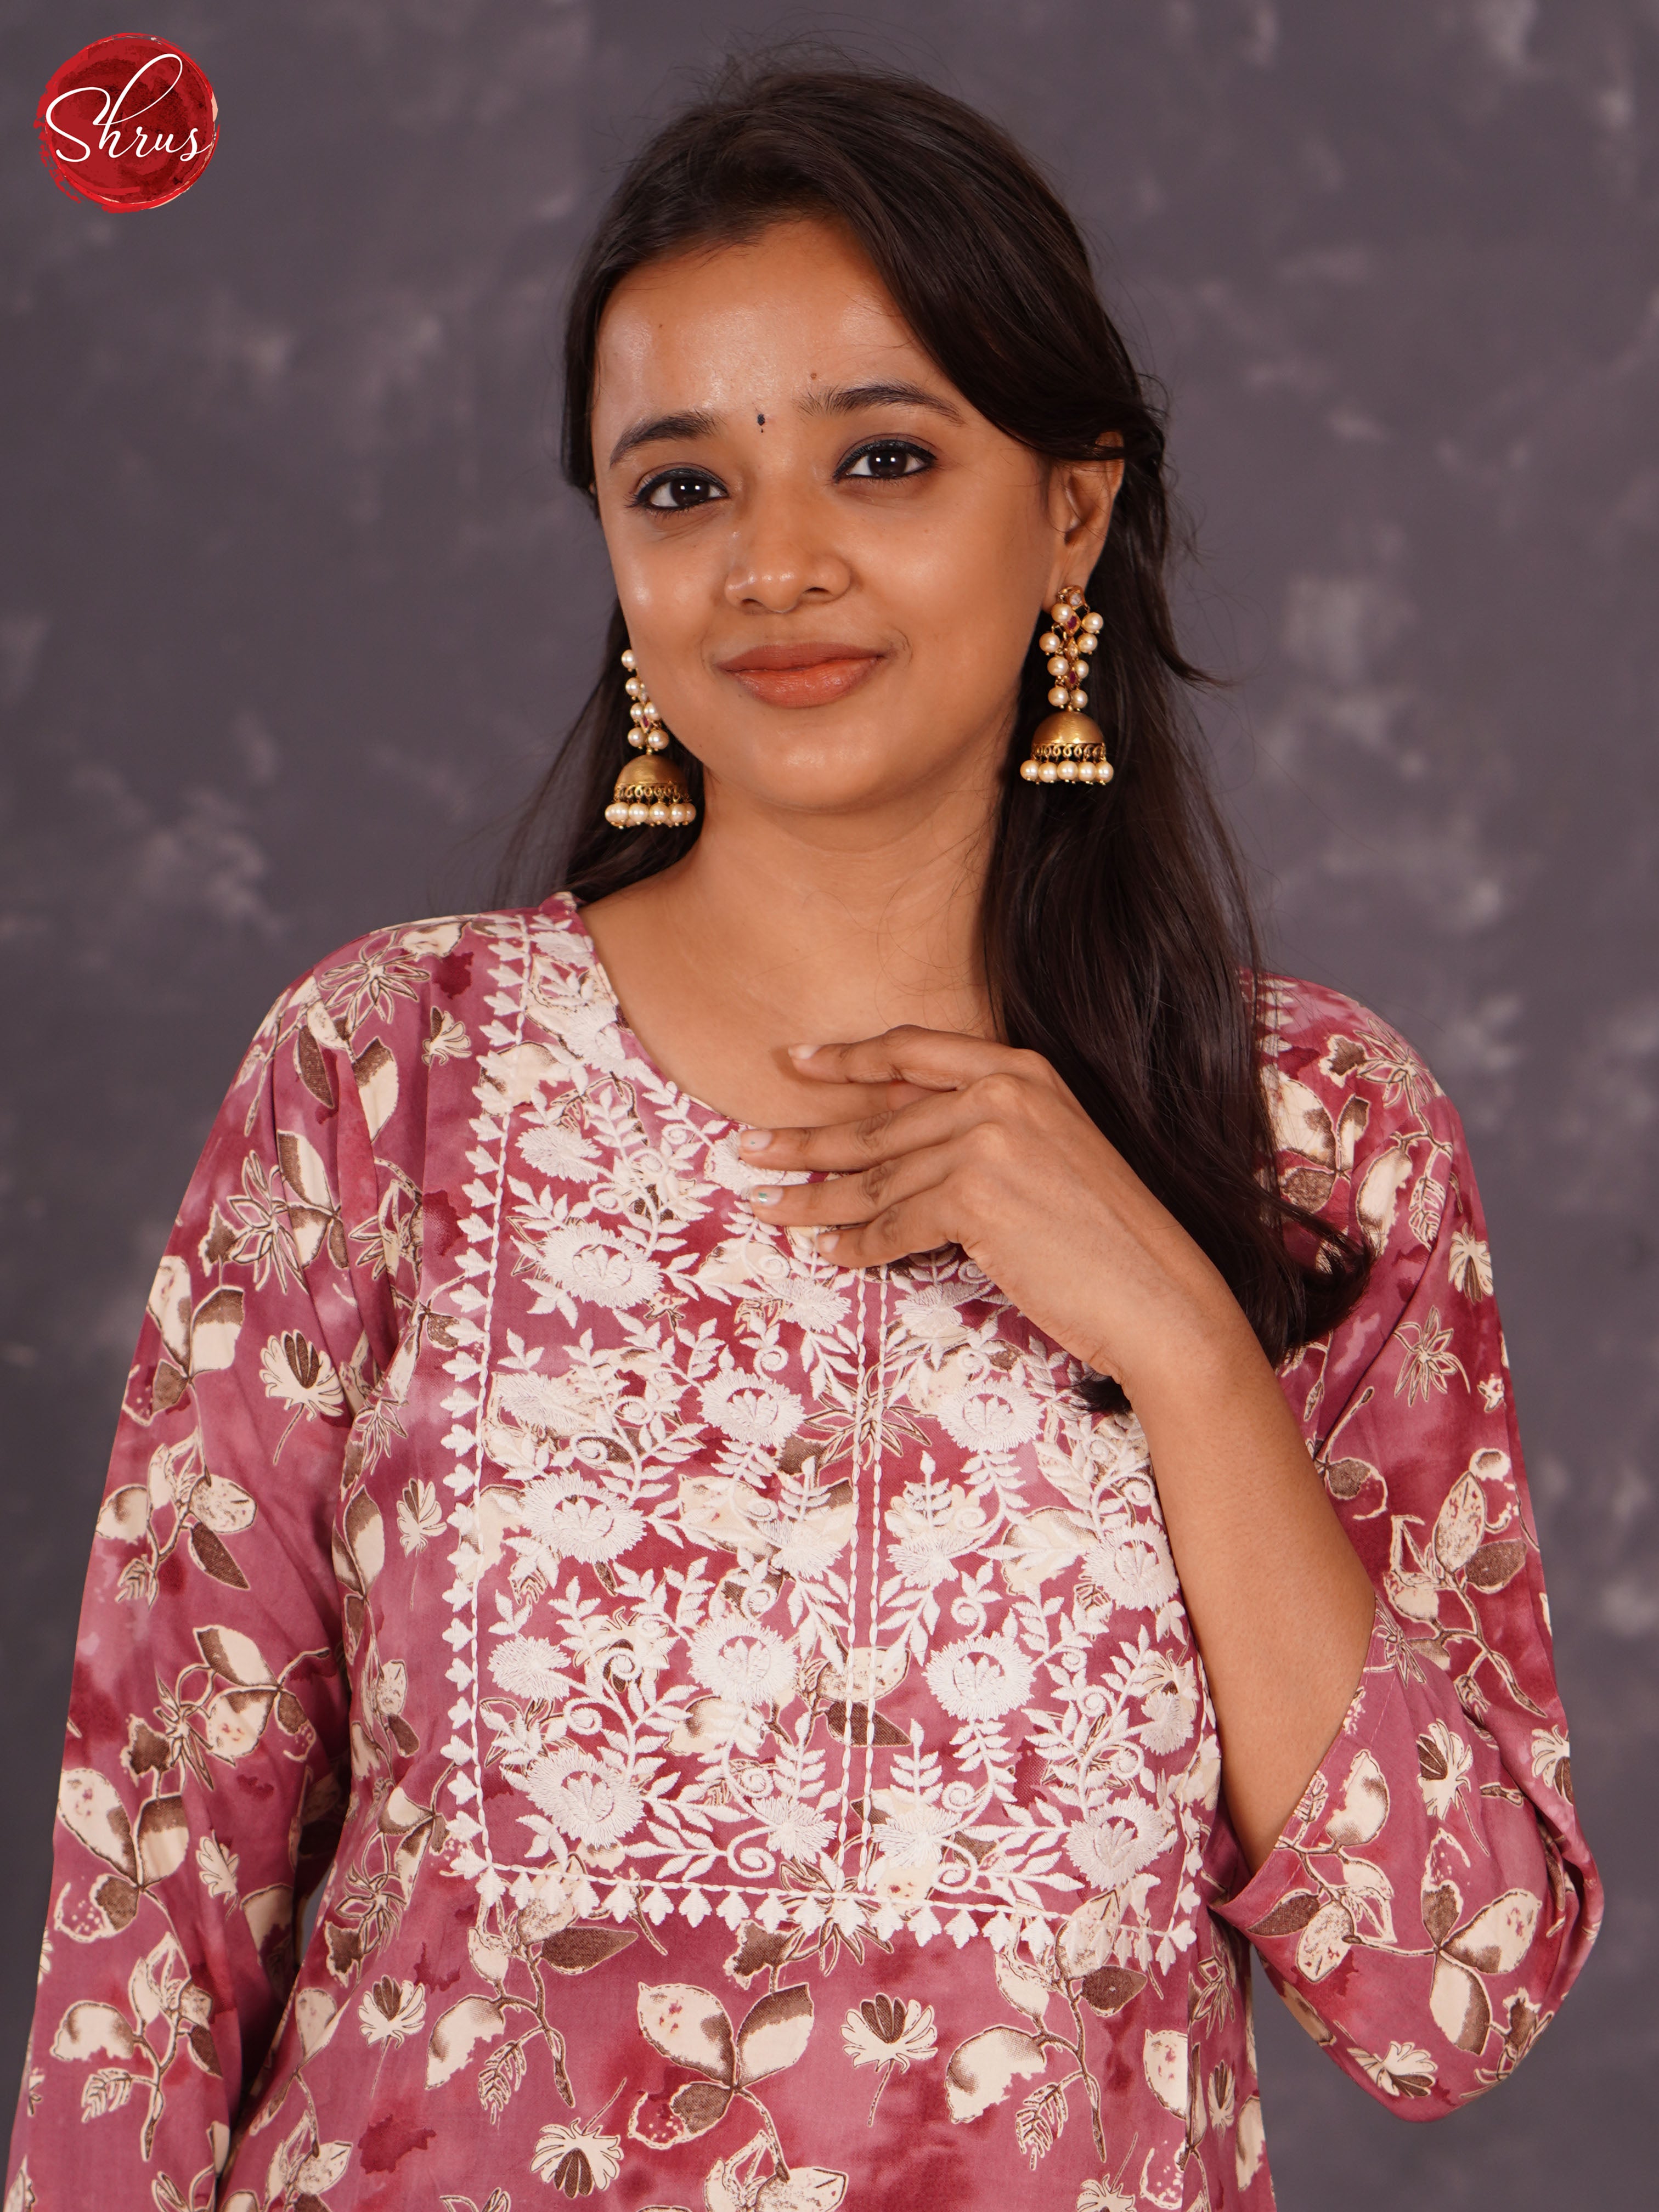 Onion Pink- Printed Rayon Straight Readymade kurti with embroidery in the  neck - Shop on ShrusEternity.com